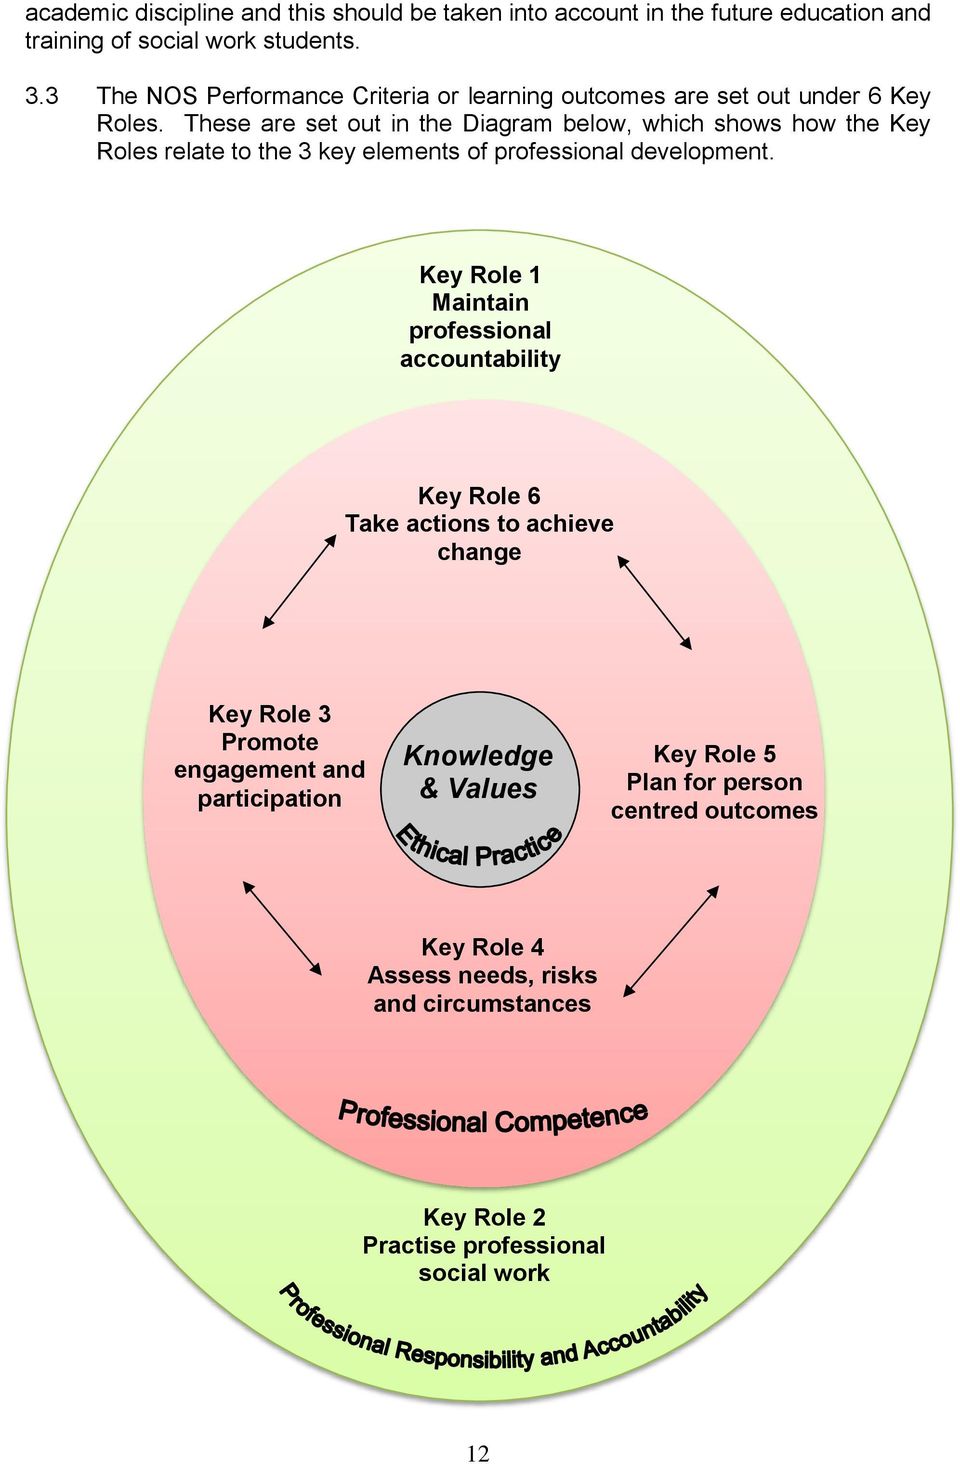 These are set out in the Diagram below, which shows how the Key Roles relate to the 3 key elements of professional development.